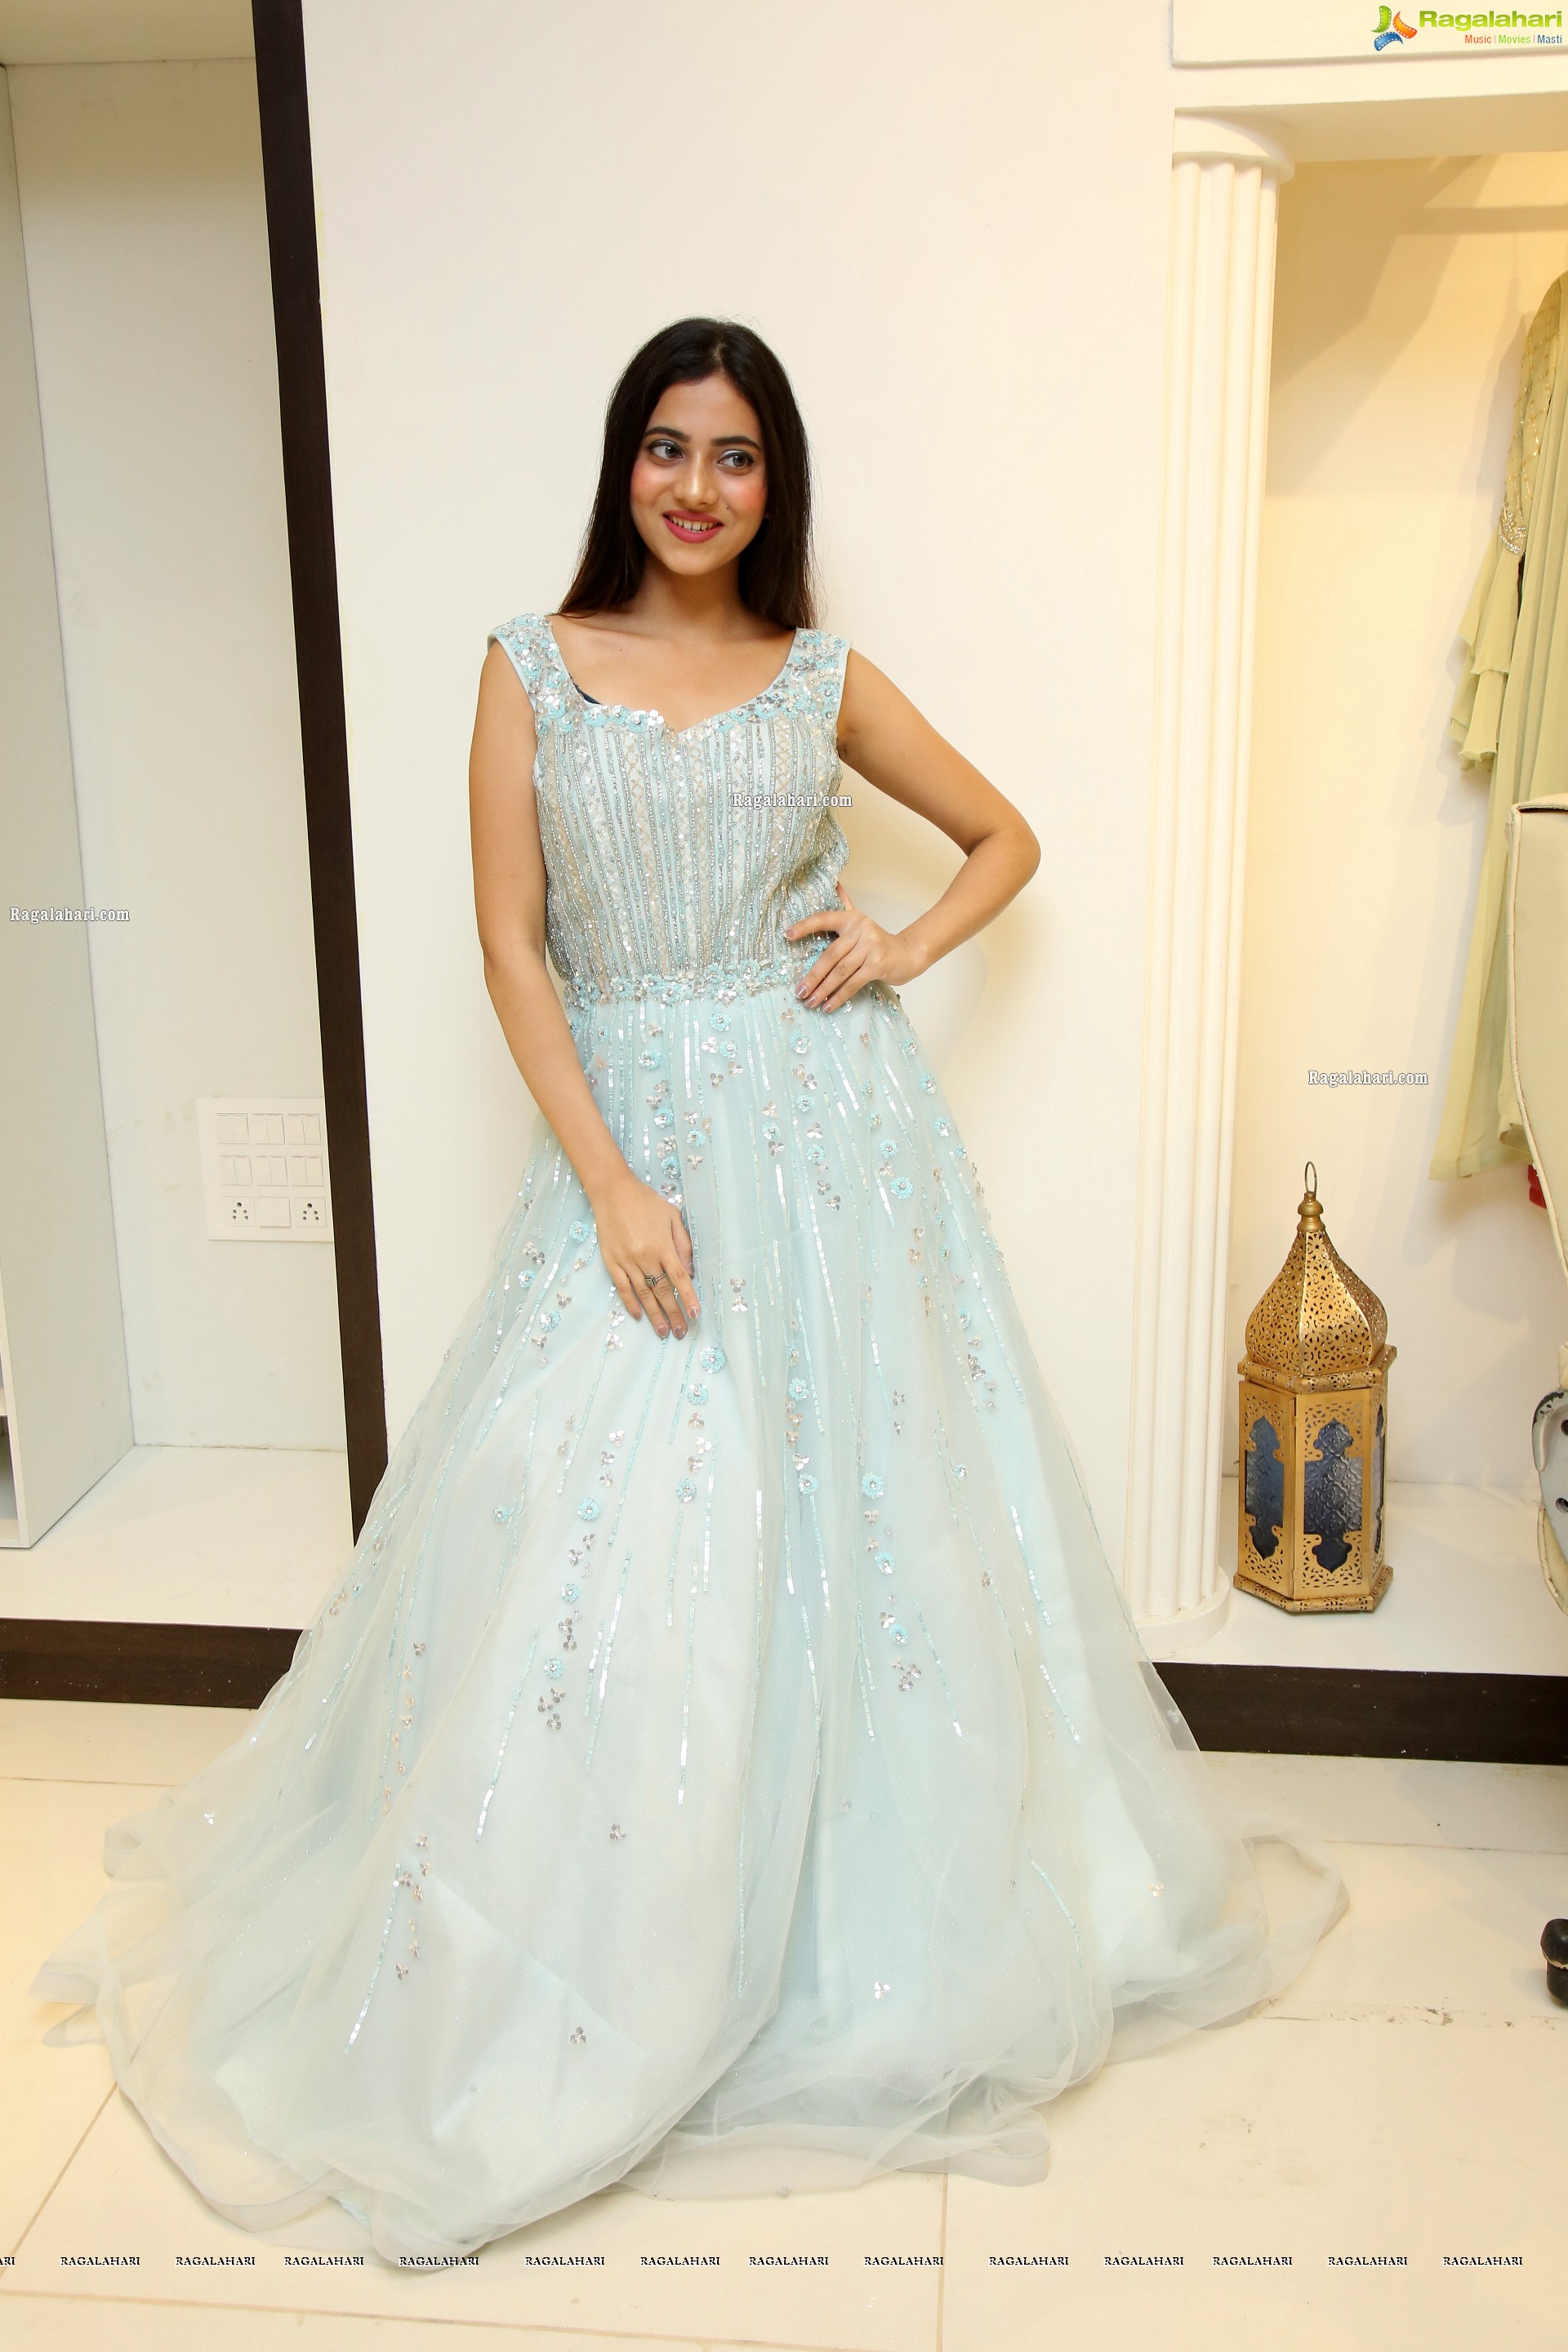 Dimple Thakur in Baby Blue Gown, HD Photo Gallery